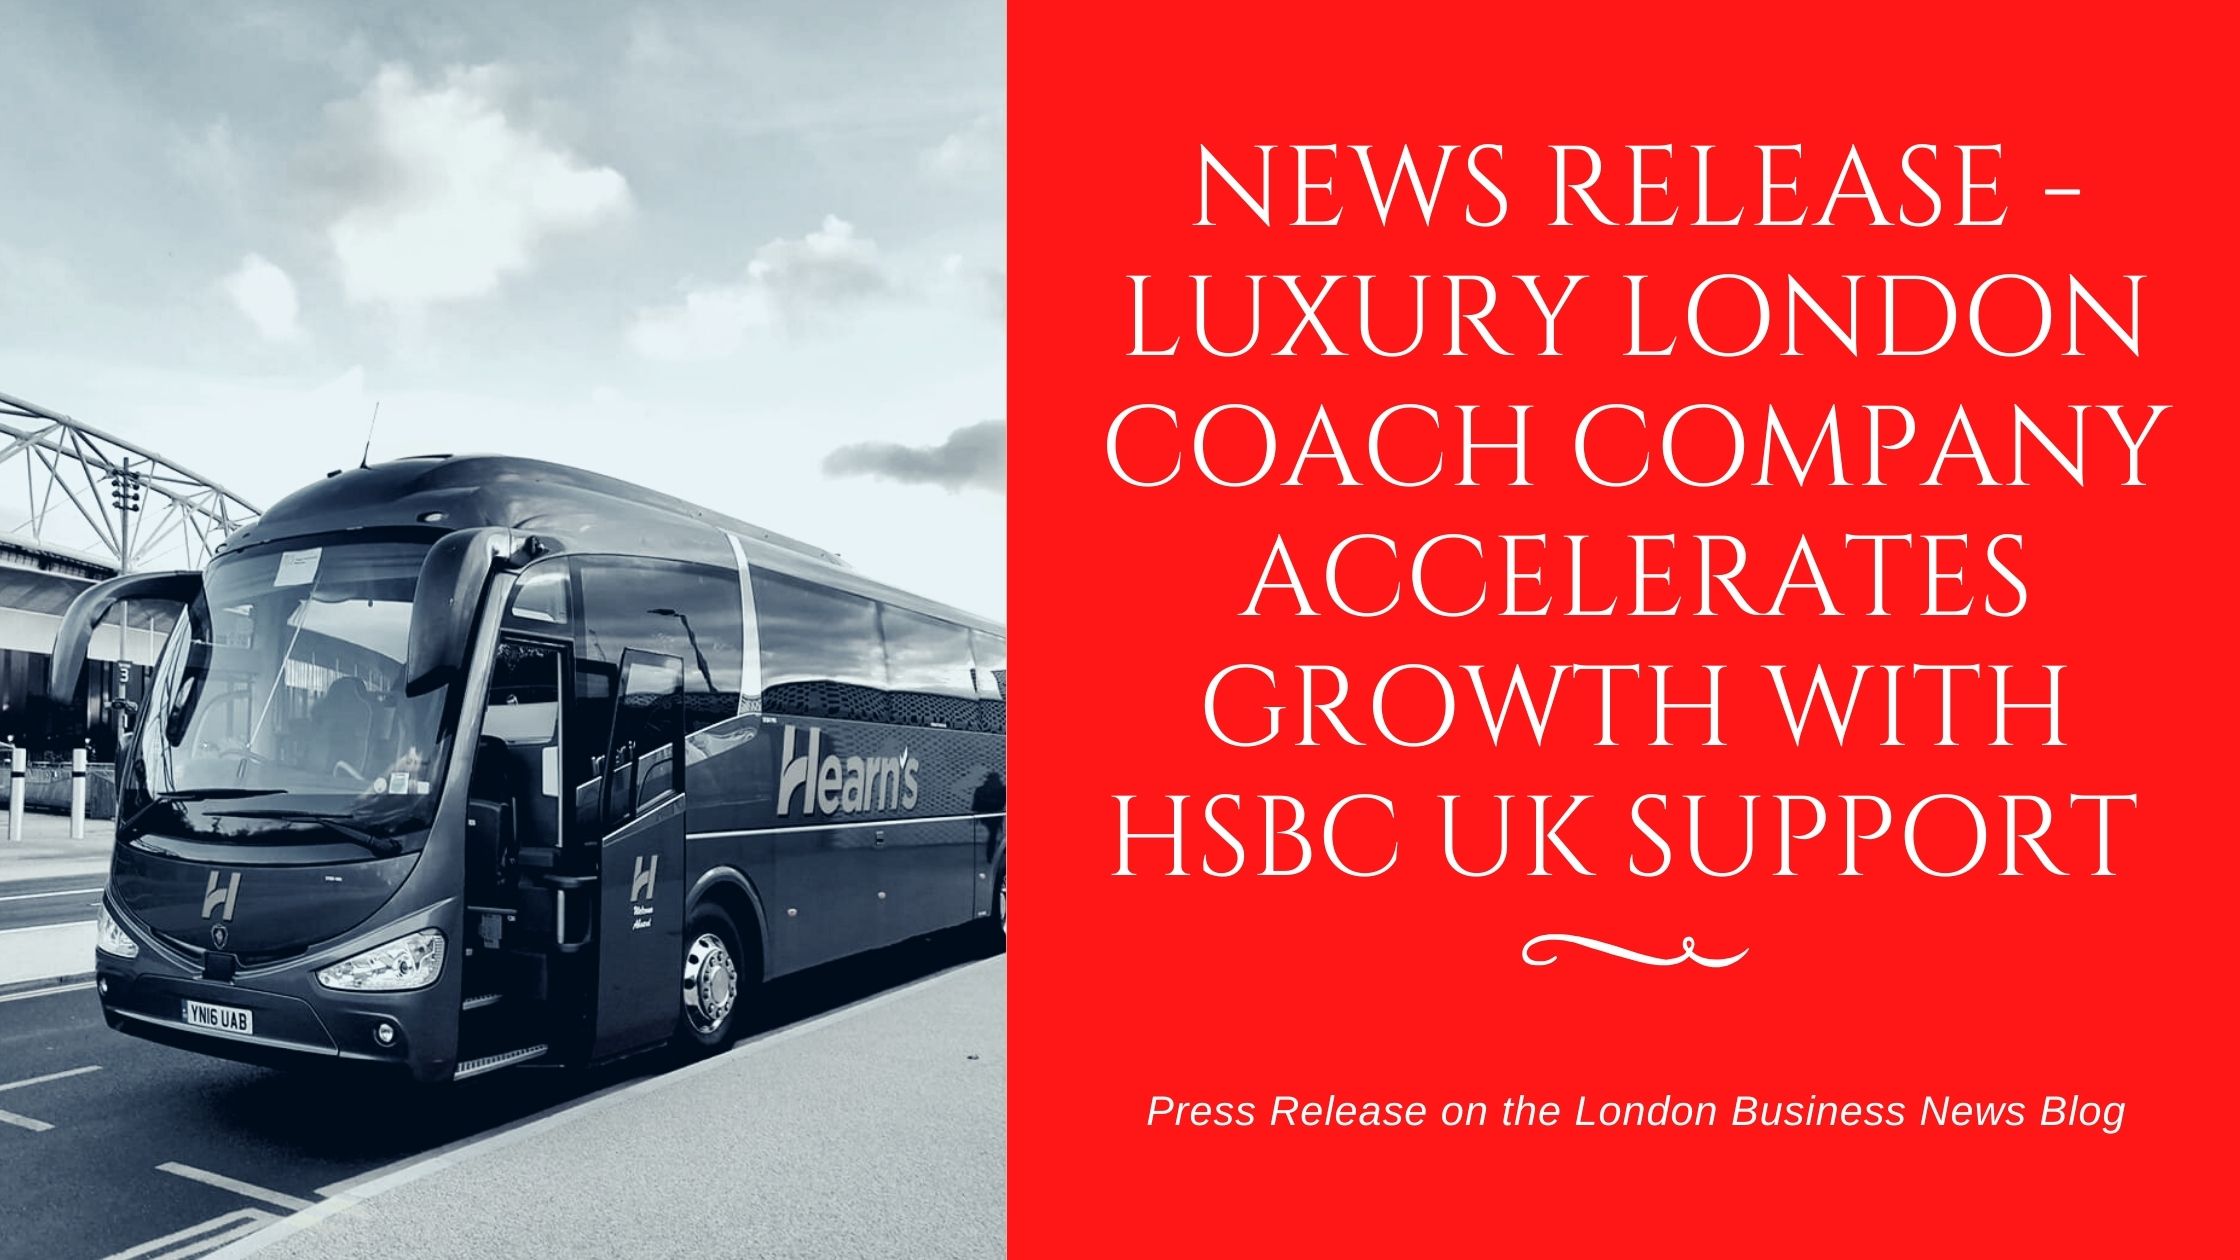 hearns-coaches-and-hsbc-bank-collaboration-announcement